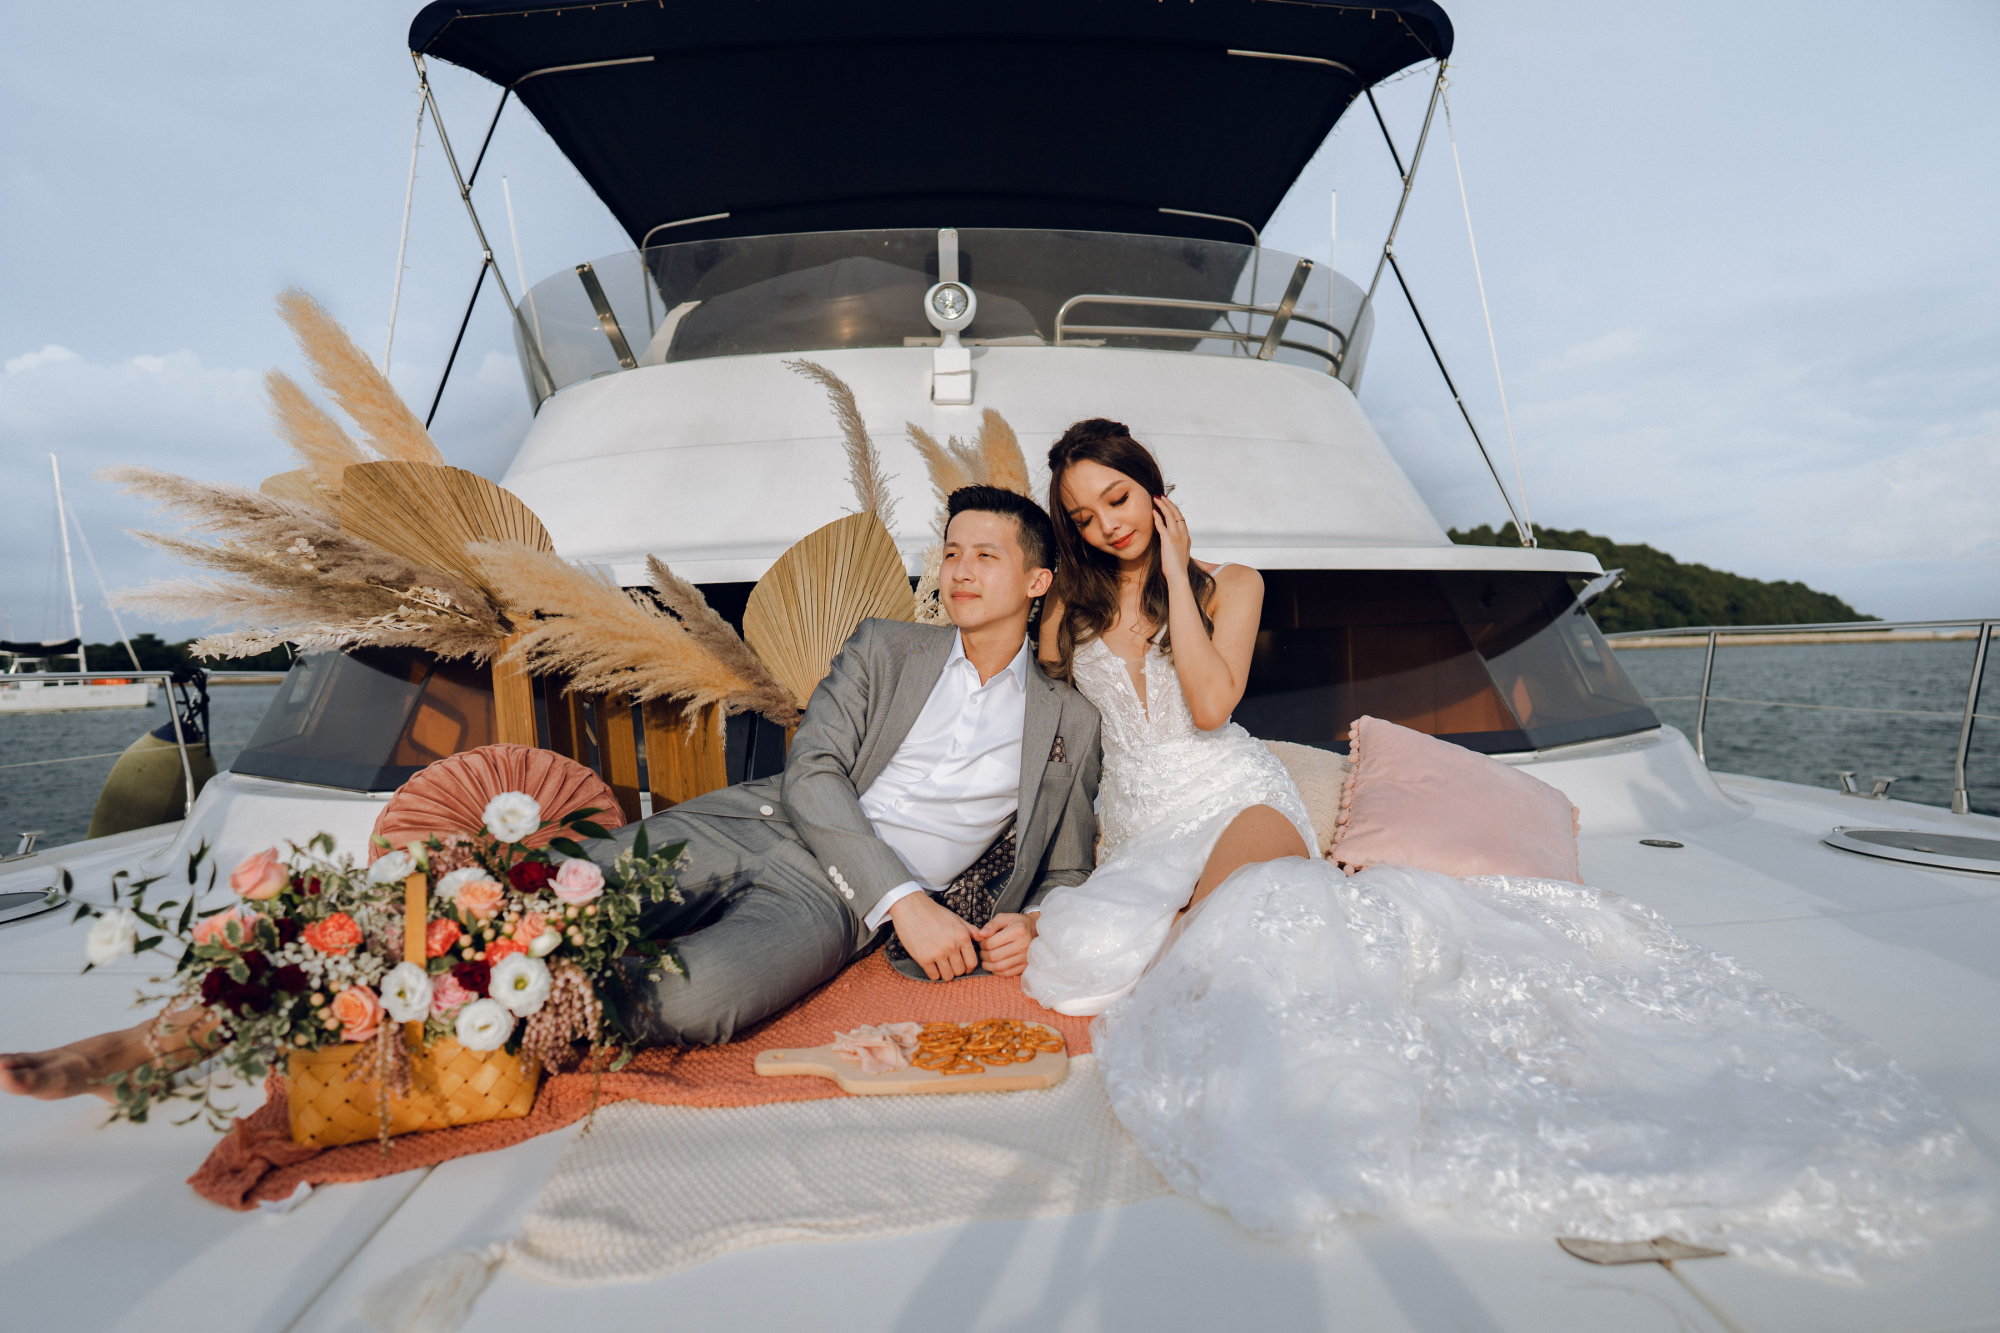 Sunset Prewedding Photoshoot On A Yacht With Romantic Floral Styling by Samantha on OneThreeOneFour 2